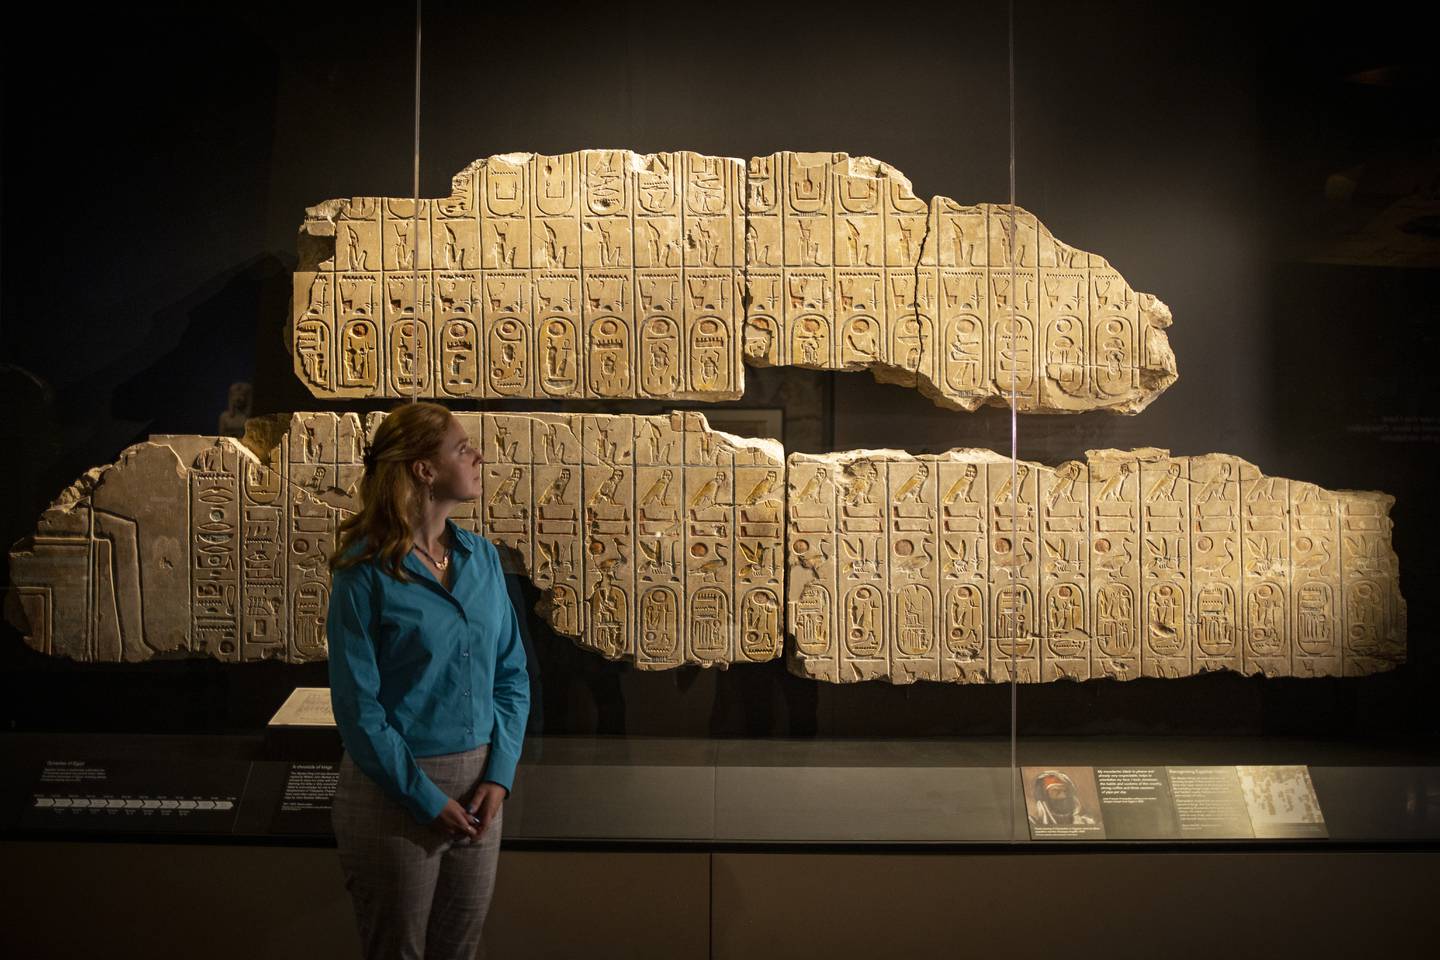 A British Museum member of staff poses next to the Rosetta Stone during a photocall for the coming Hieroglyphs: unlocking ancient Egypt exhibition in London on Thursday. EPA